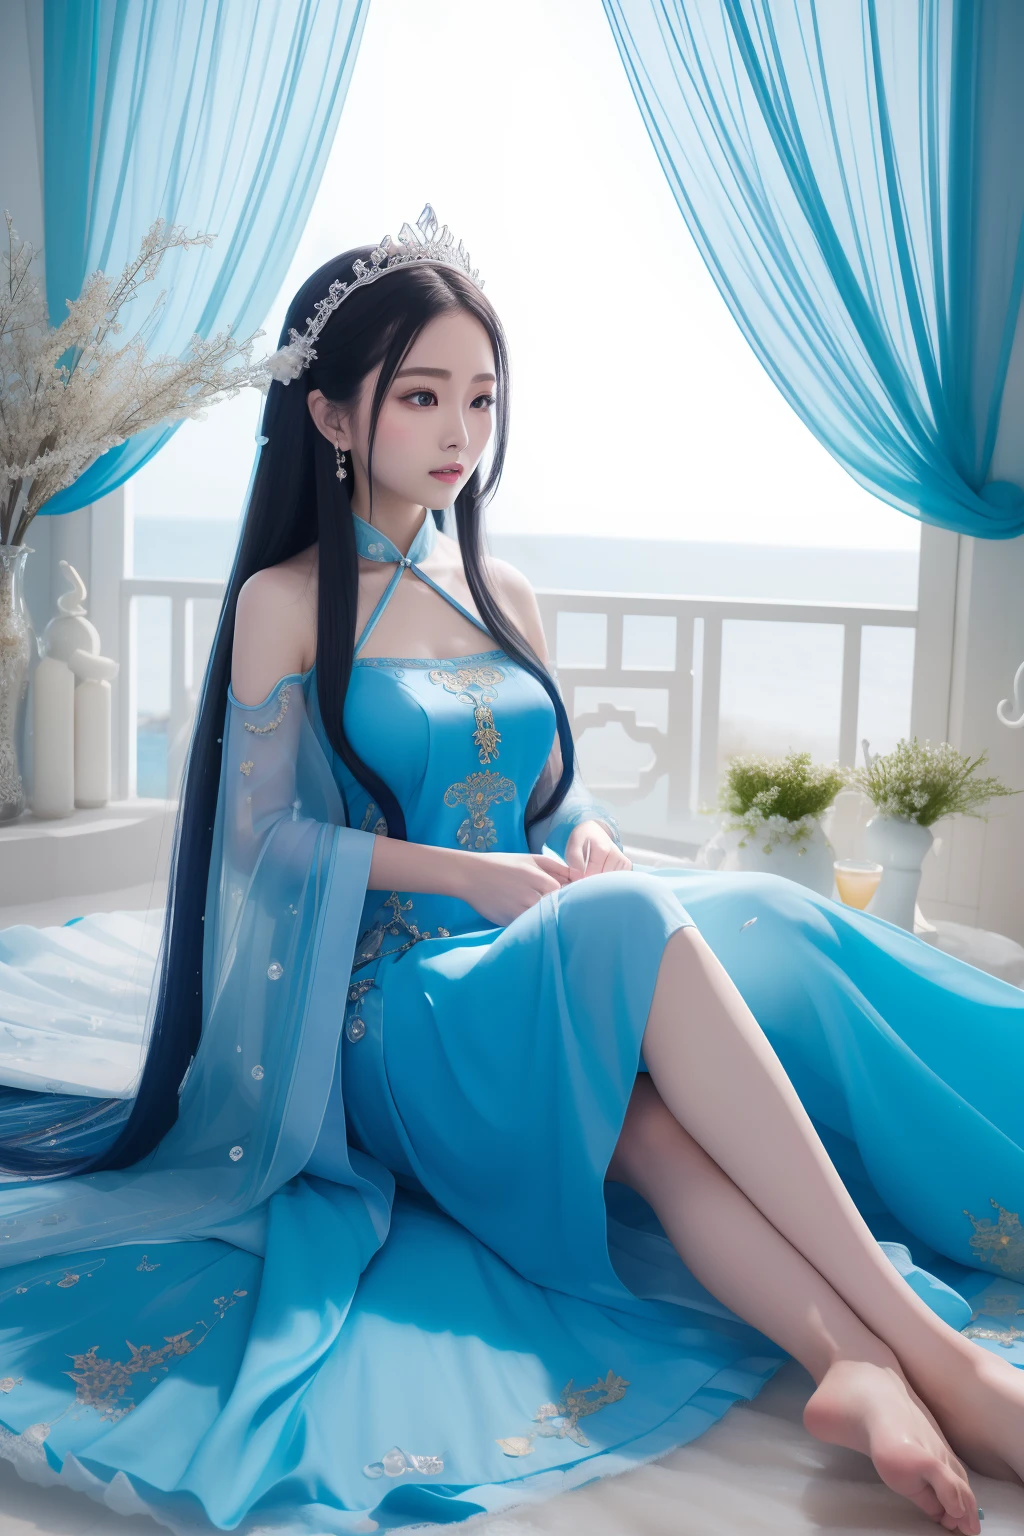 there is a woman in a blue dress laying on a bed, closeup fantasy with water magic, Ethereal fantasy, xianxia fantasy, queen of the sea mu yanling, water fairy, ethereal fairytale, Palace ， A girl in Hanfu, full-body xianxia, Ethereal!!!!!!!, shaxi, real photoshoot queen of oceans, Chinese fantasy, fantasy photoshoot